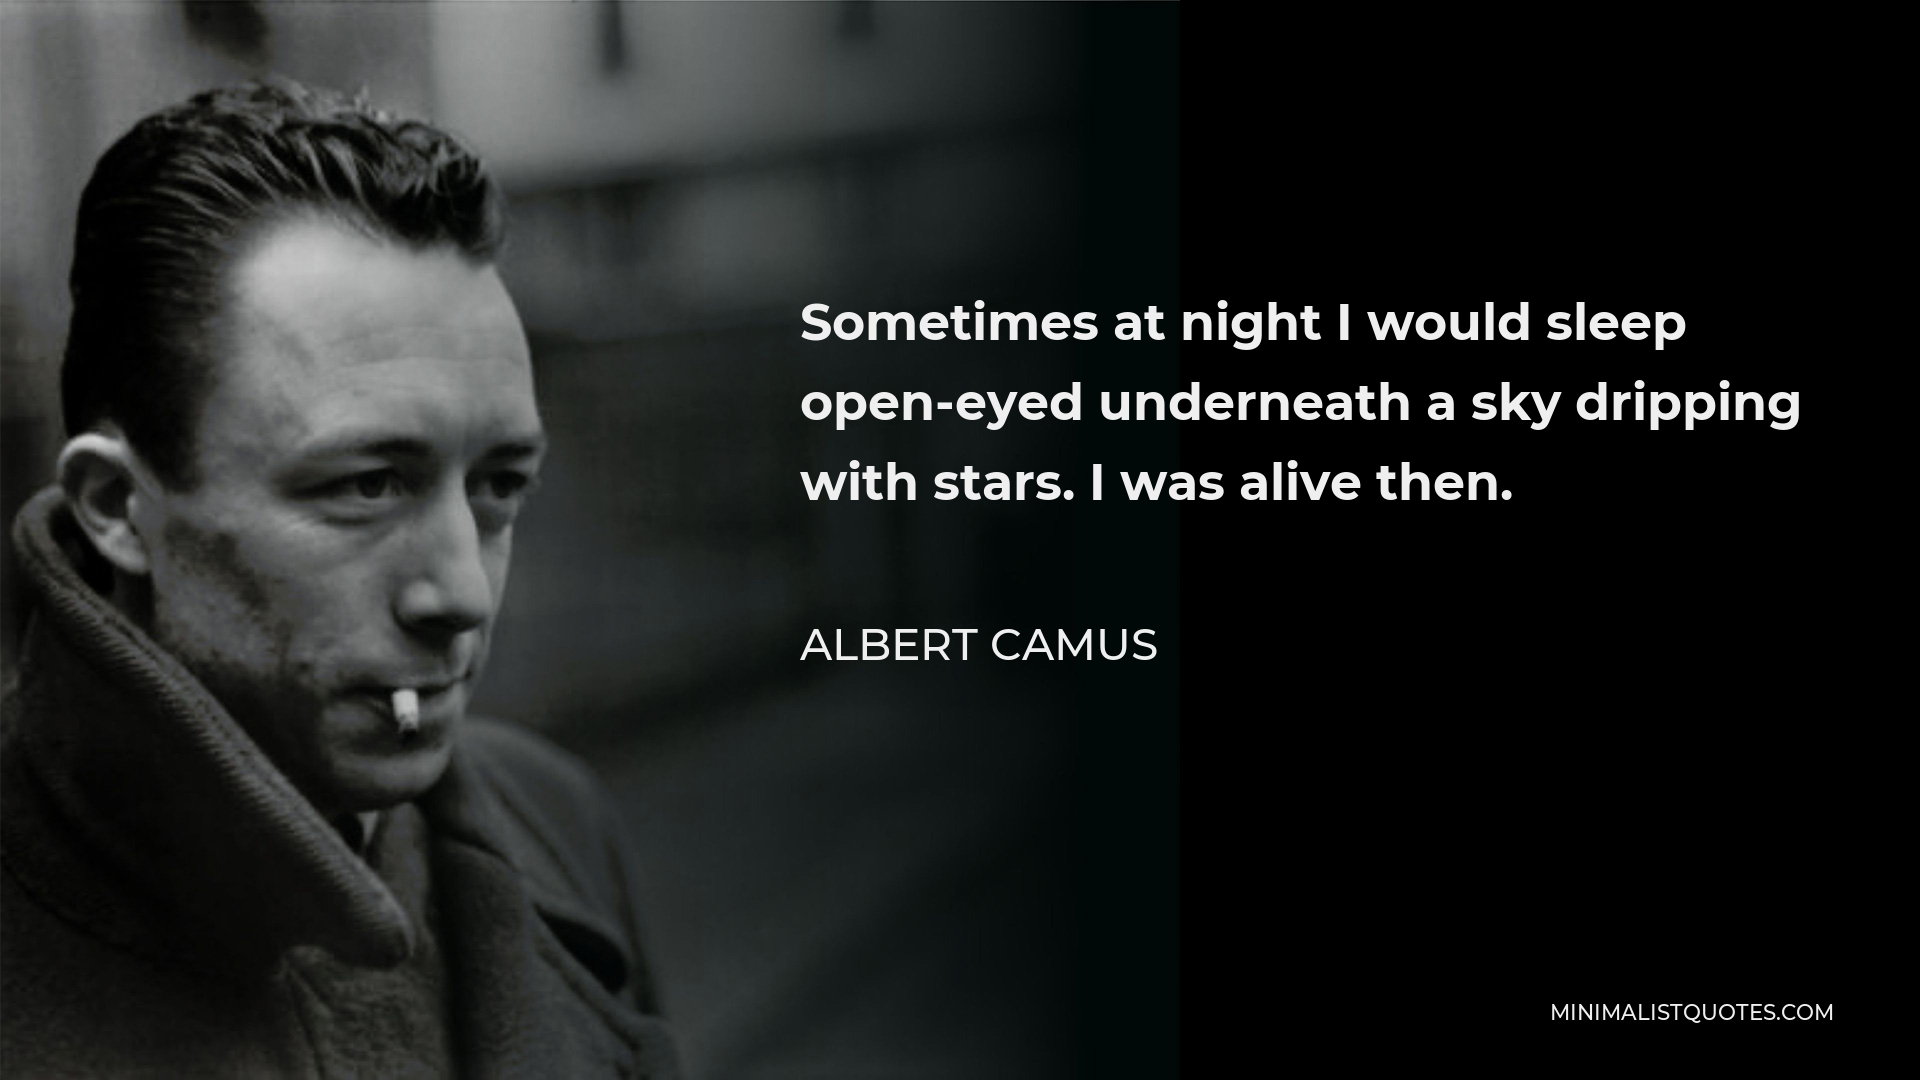 Albert Camus Quote - Sometimes at night I would sleep open-eyed underneath a sky dripping with stars. I was alive then.